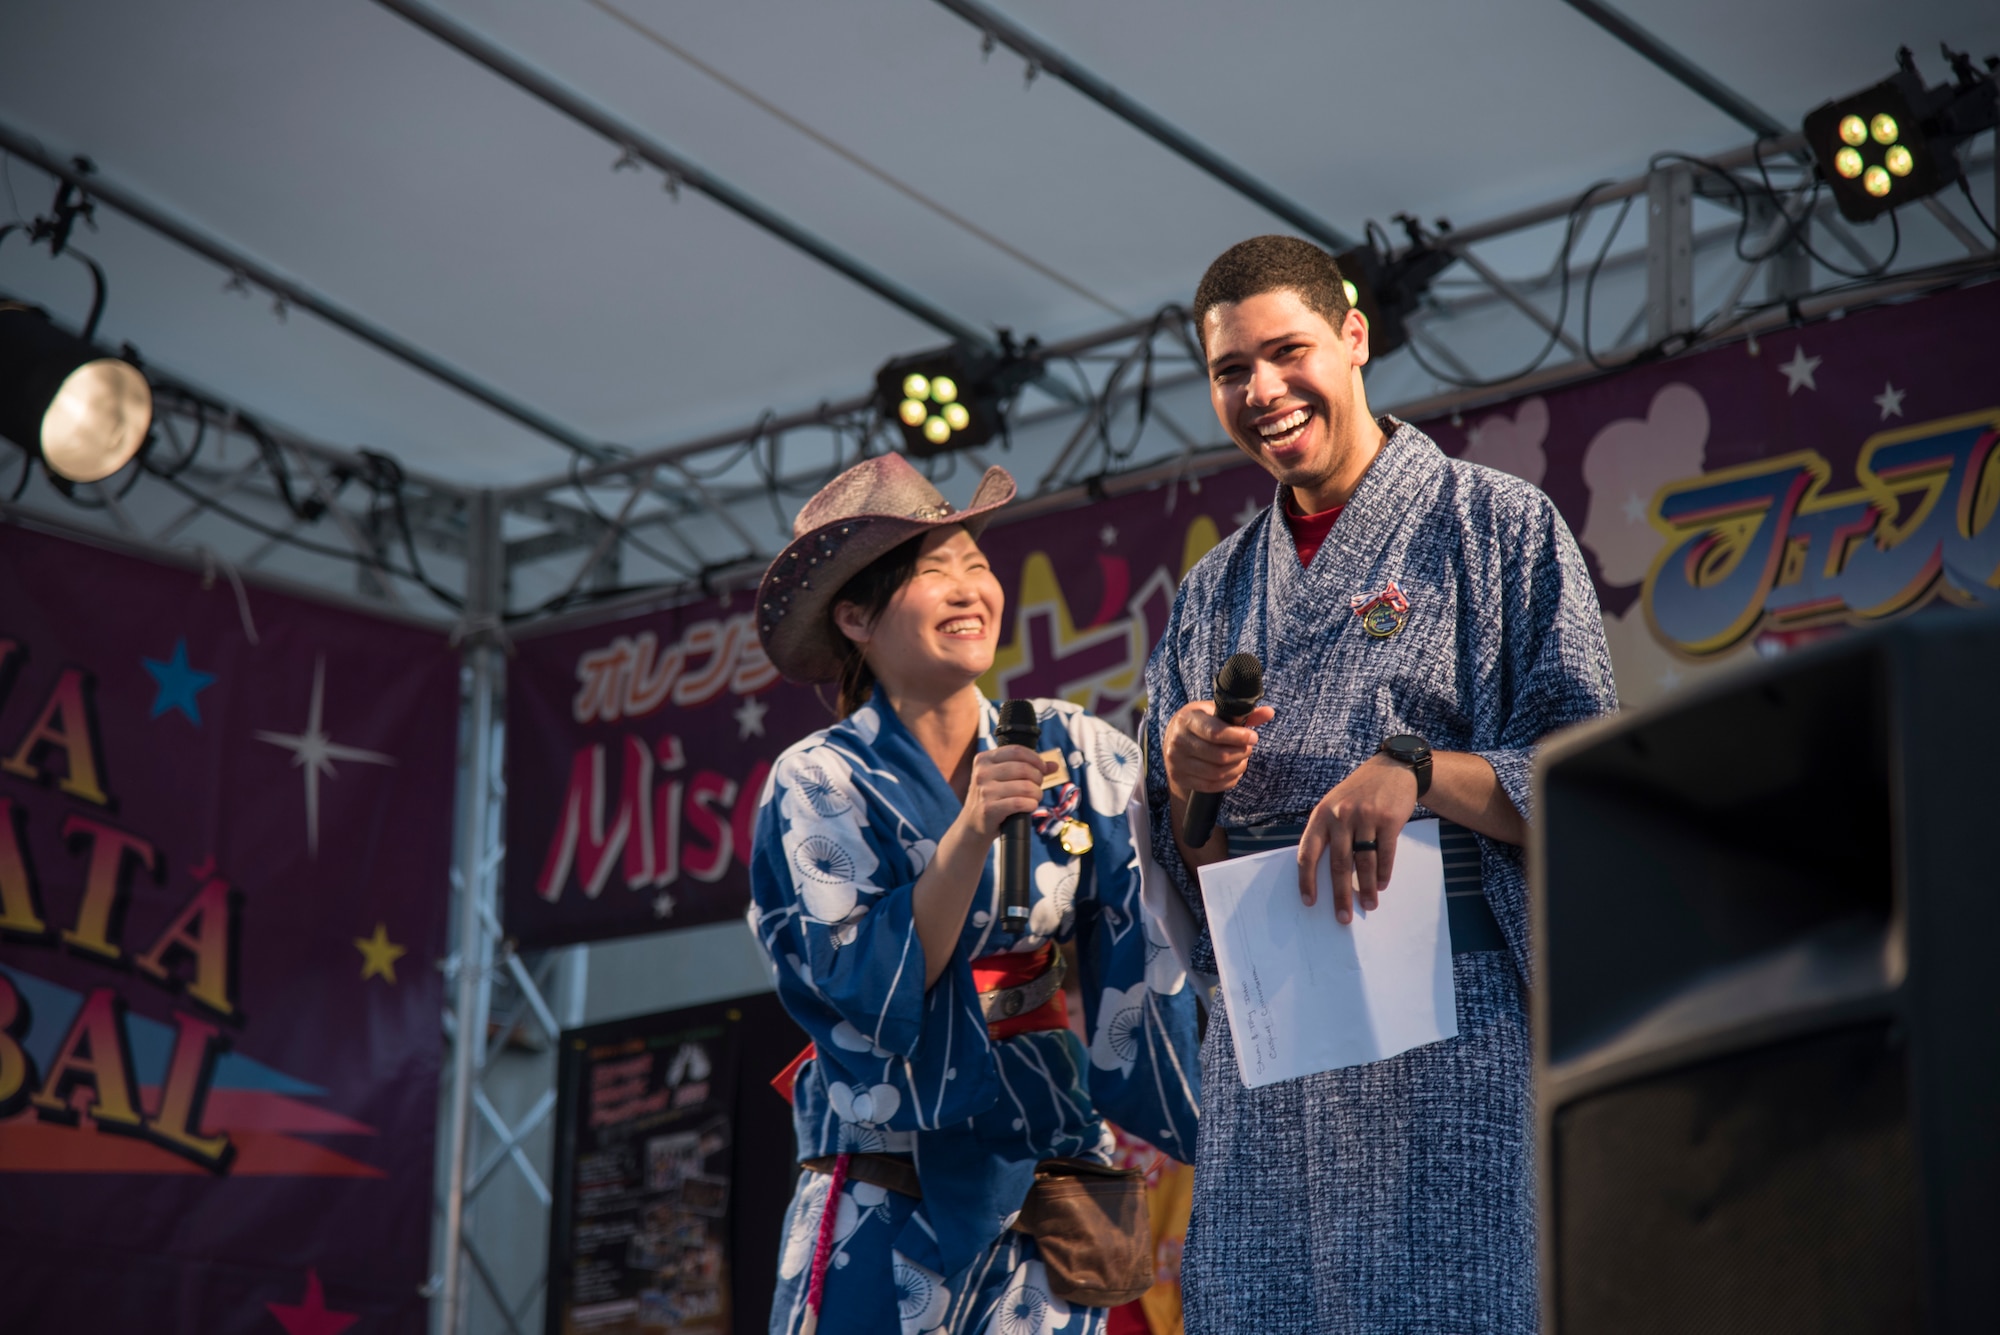 Shumi Kaufman, left, a 35th Force Support Squadron Airman and Family Readiness Center intercultural coordinator, and U.S. Air Force Staff Sgt. Tony Rodeback, an Armed Forces Network – Misawa producer, introduce contestants of the yukata fashion show during the Tanabata Festival in Misawa City, Japan, July 26, 2019. The fashion show featured a variety of guests wearing colorful and traditional Japanese summer kimonos. (U.S. Air Force photo by Branden Yamada)